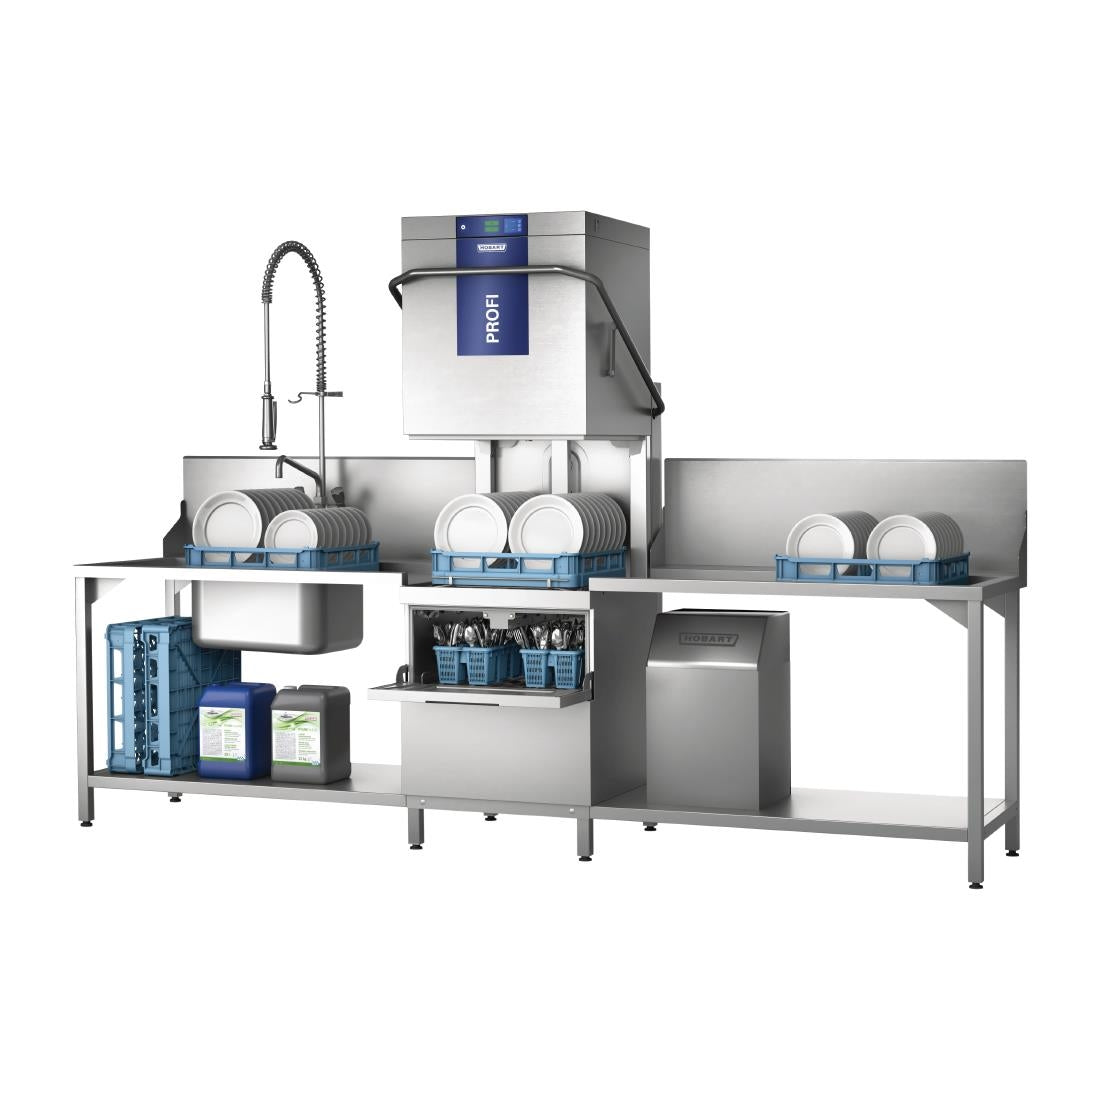 FE668 Hobart Profi Dual Level Pass Through Dishwasher TLWW-10A with Integral Softener JD Catering Equipment Solutions Ltd